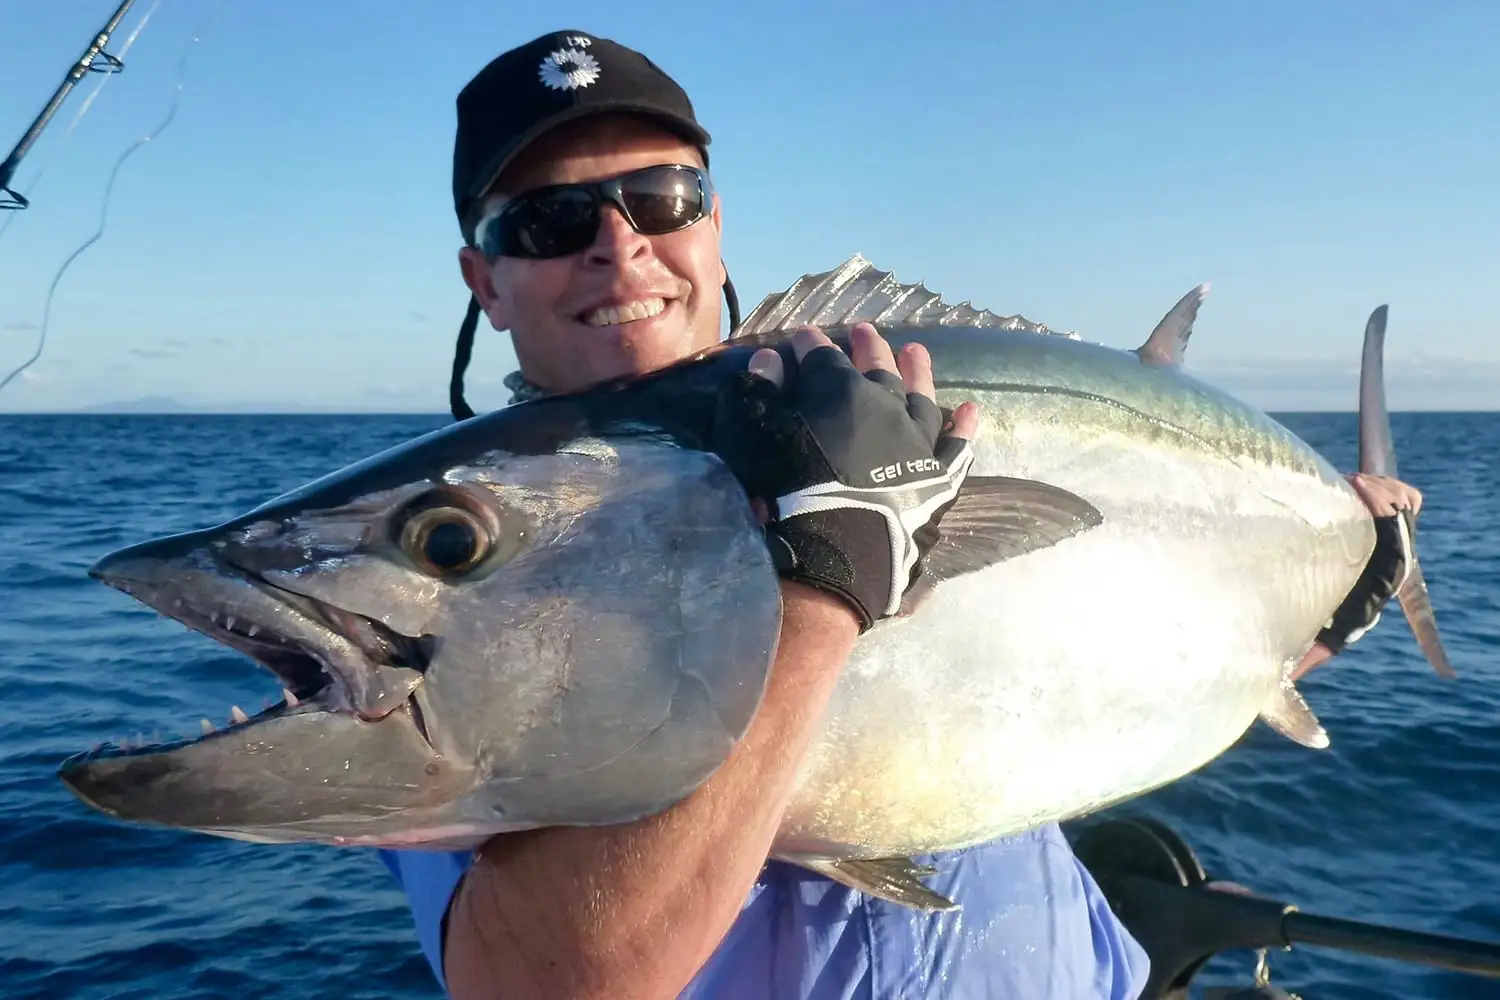 Landing a Trophy Vanuatu Dogtooth Tuna will put a Smile on Many an Anglers Face.